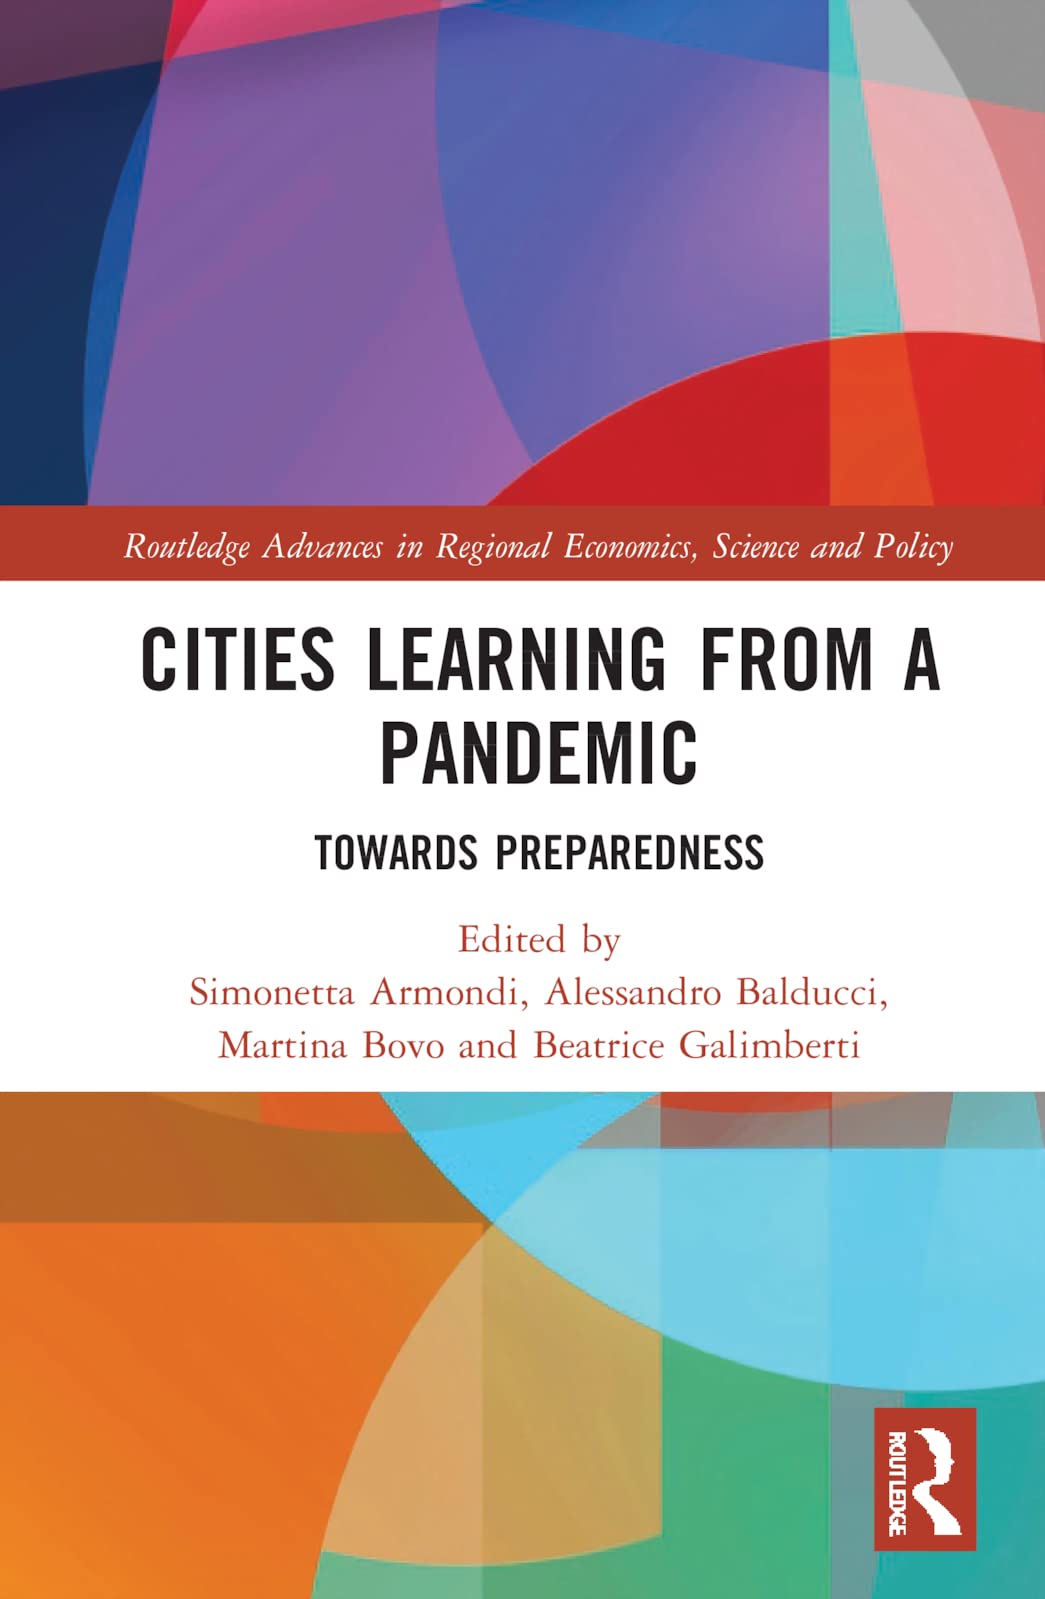 CITIES LEARNING FROM A PANDEMIC